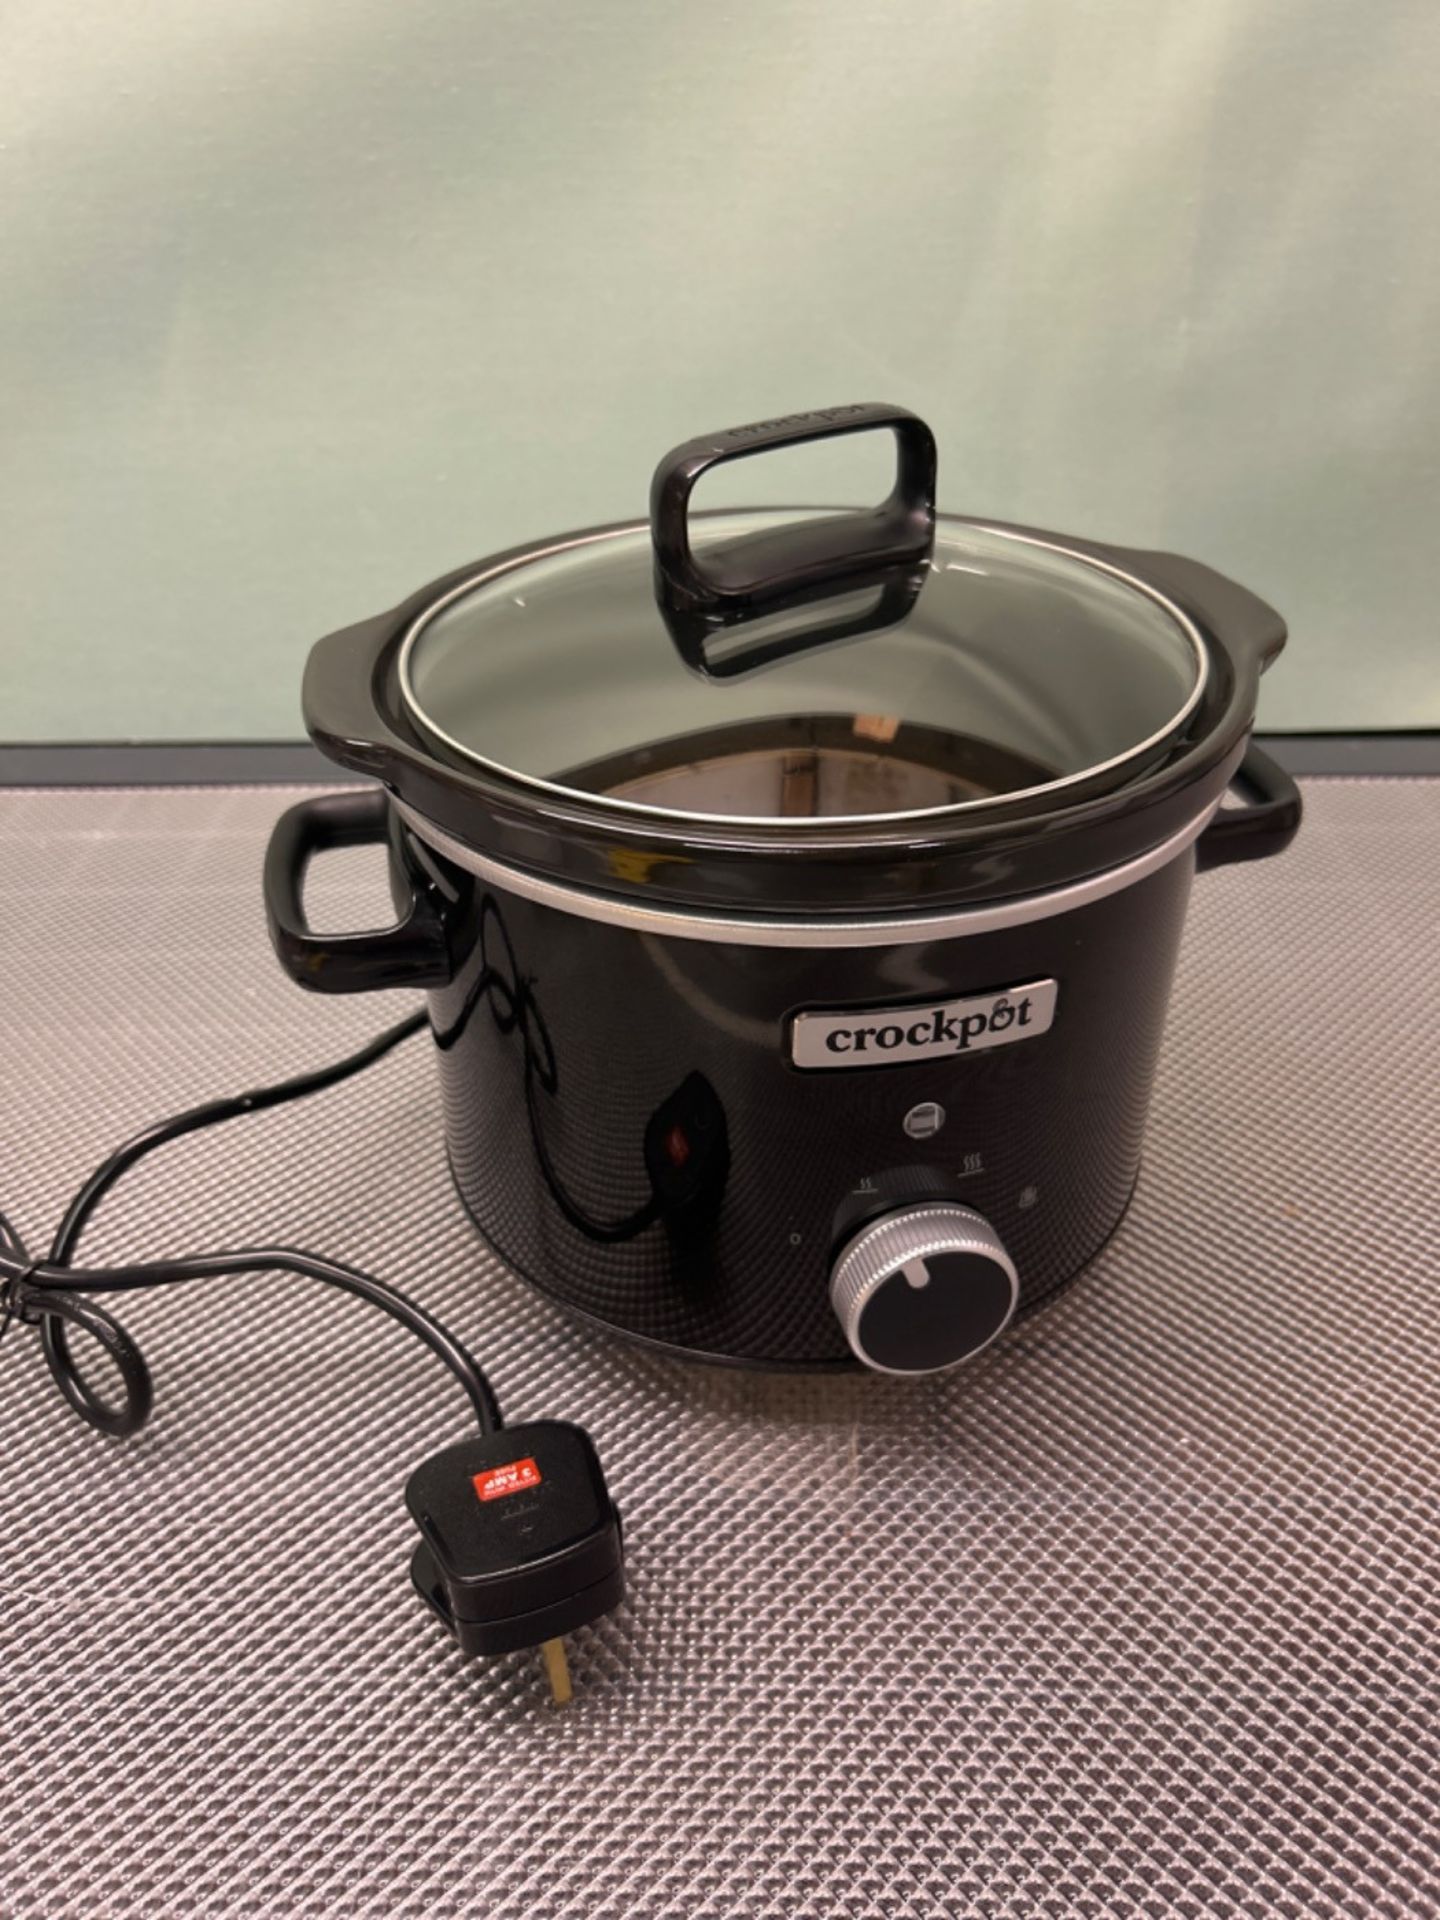 Crockpot Slow Cooker | Removable Easy-Clean Ceramic Bowl | 2.4 L (1-2 People | Energy Efficient | B - Image 2 of 3